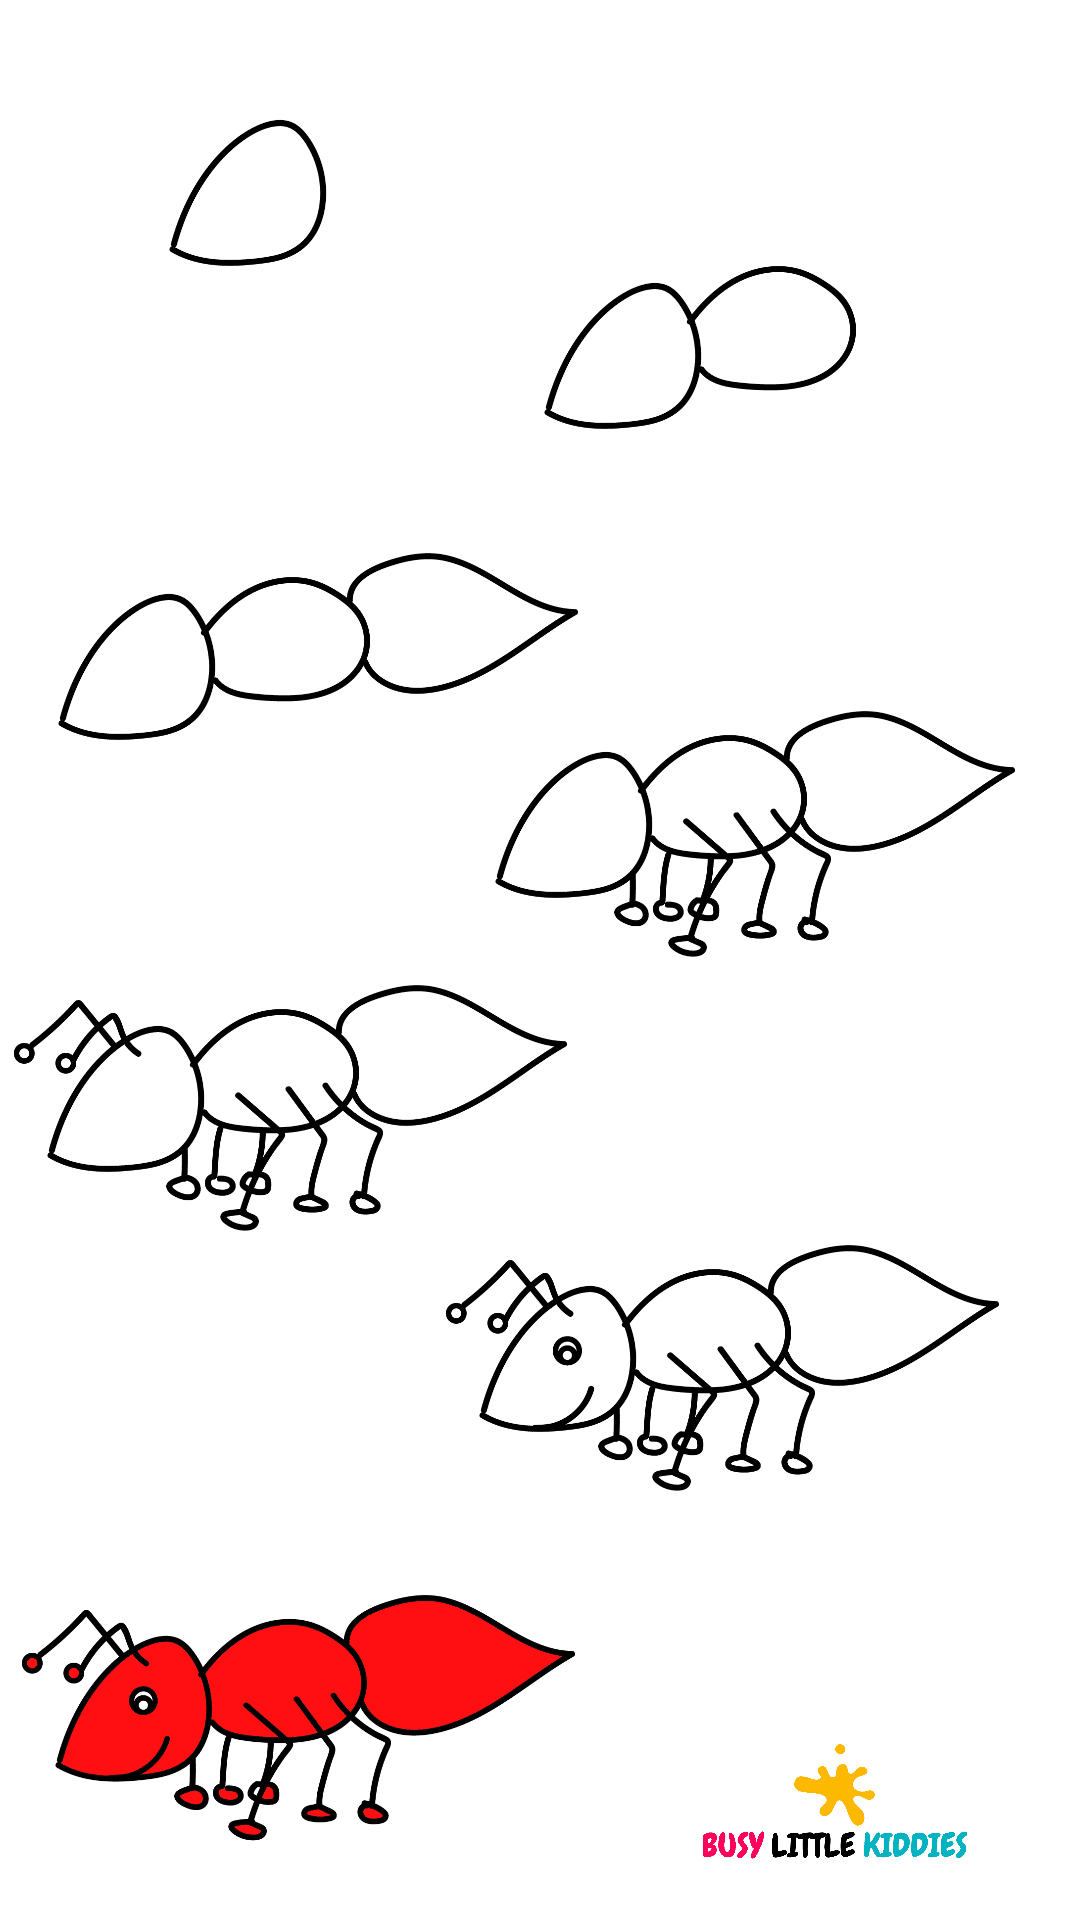 How To Draw An Ant - Step By Step